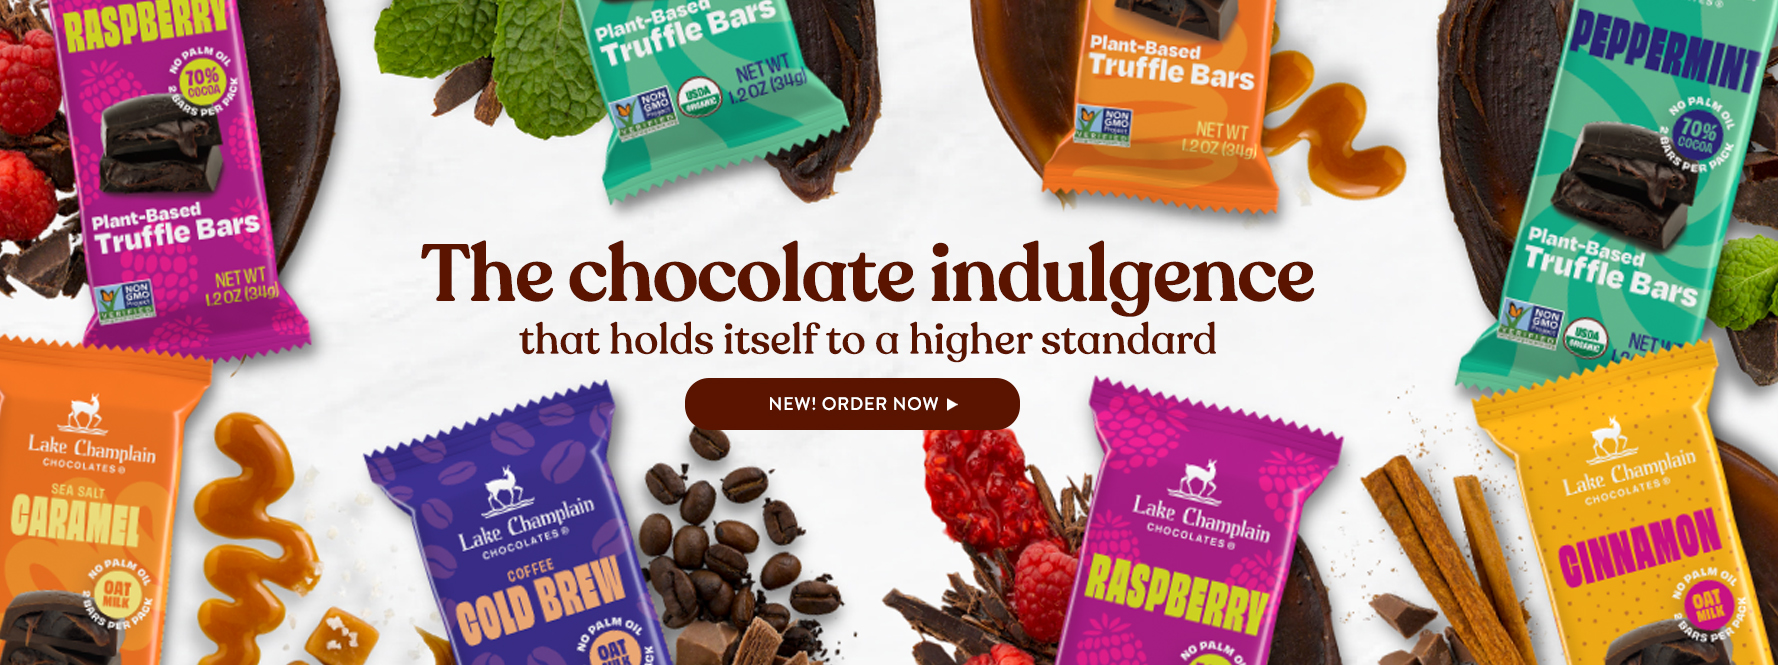 Pre-order NEW Plant-Based Truffle Bars Now